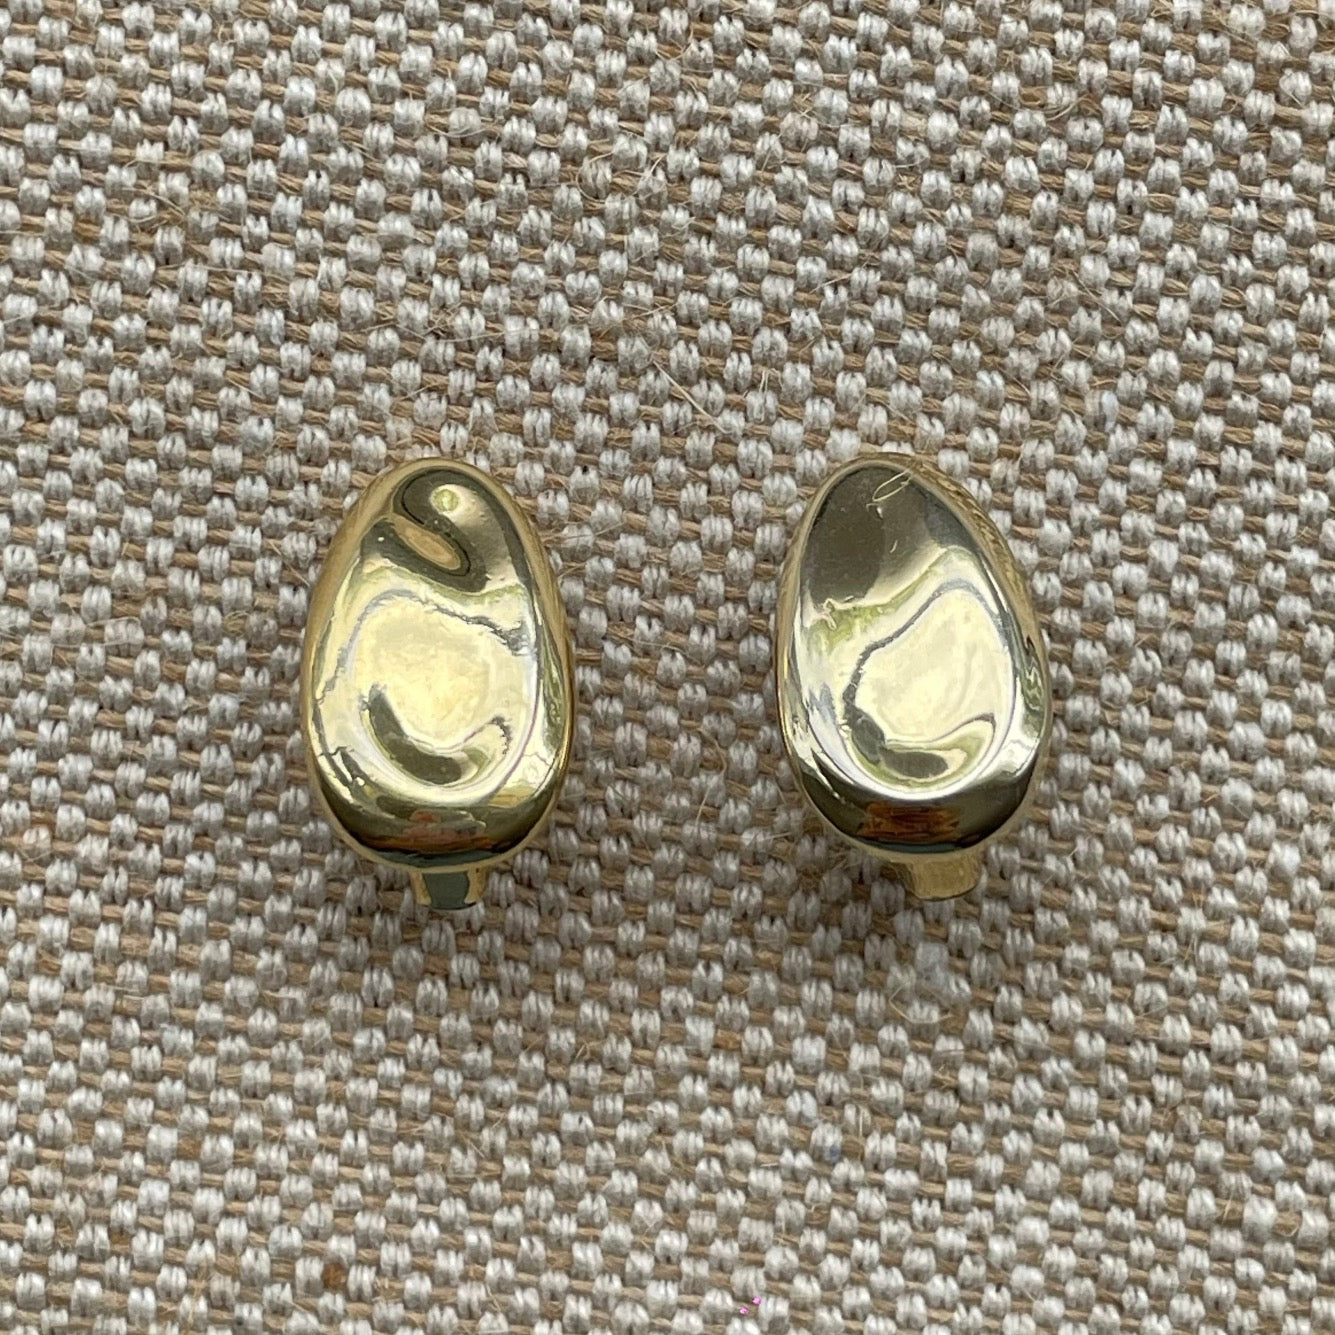 Early 2000 Gold Tone Classic Gold Nugget Clip-On Earrings